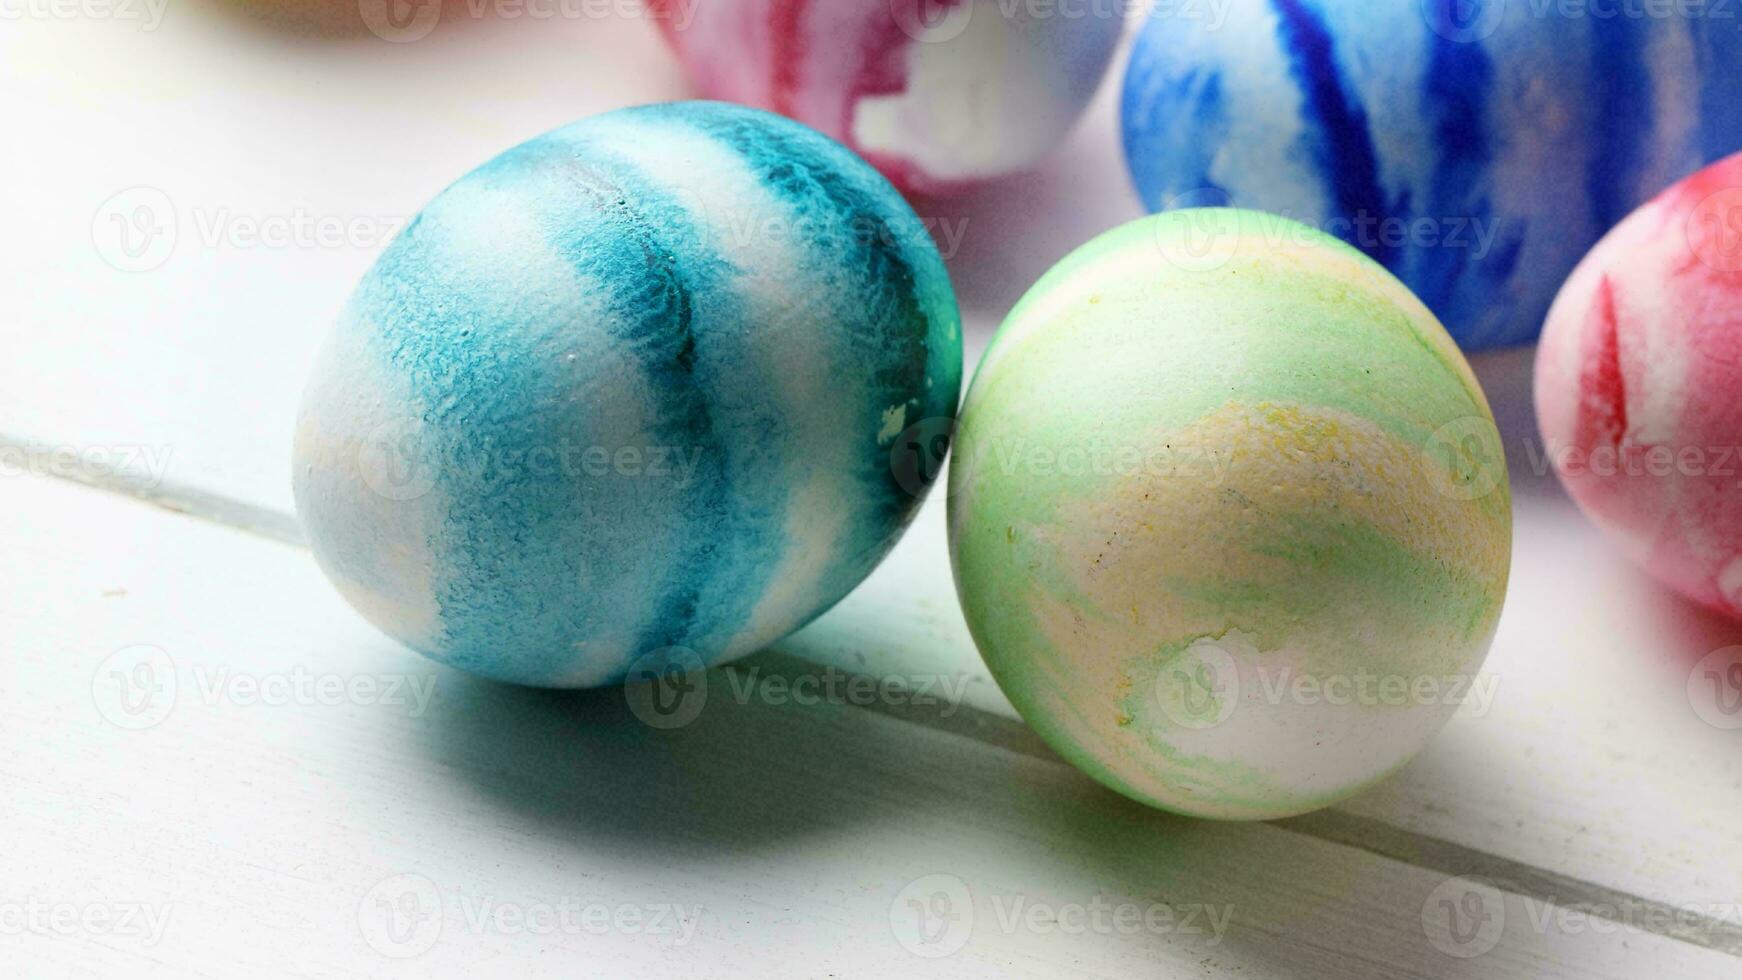 Colourful Easter Eggs. Vibrant, Festive Holiday Decorations Symbolizing Spring Celebration and Traditional Ornate Designs photo